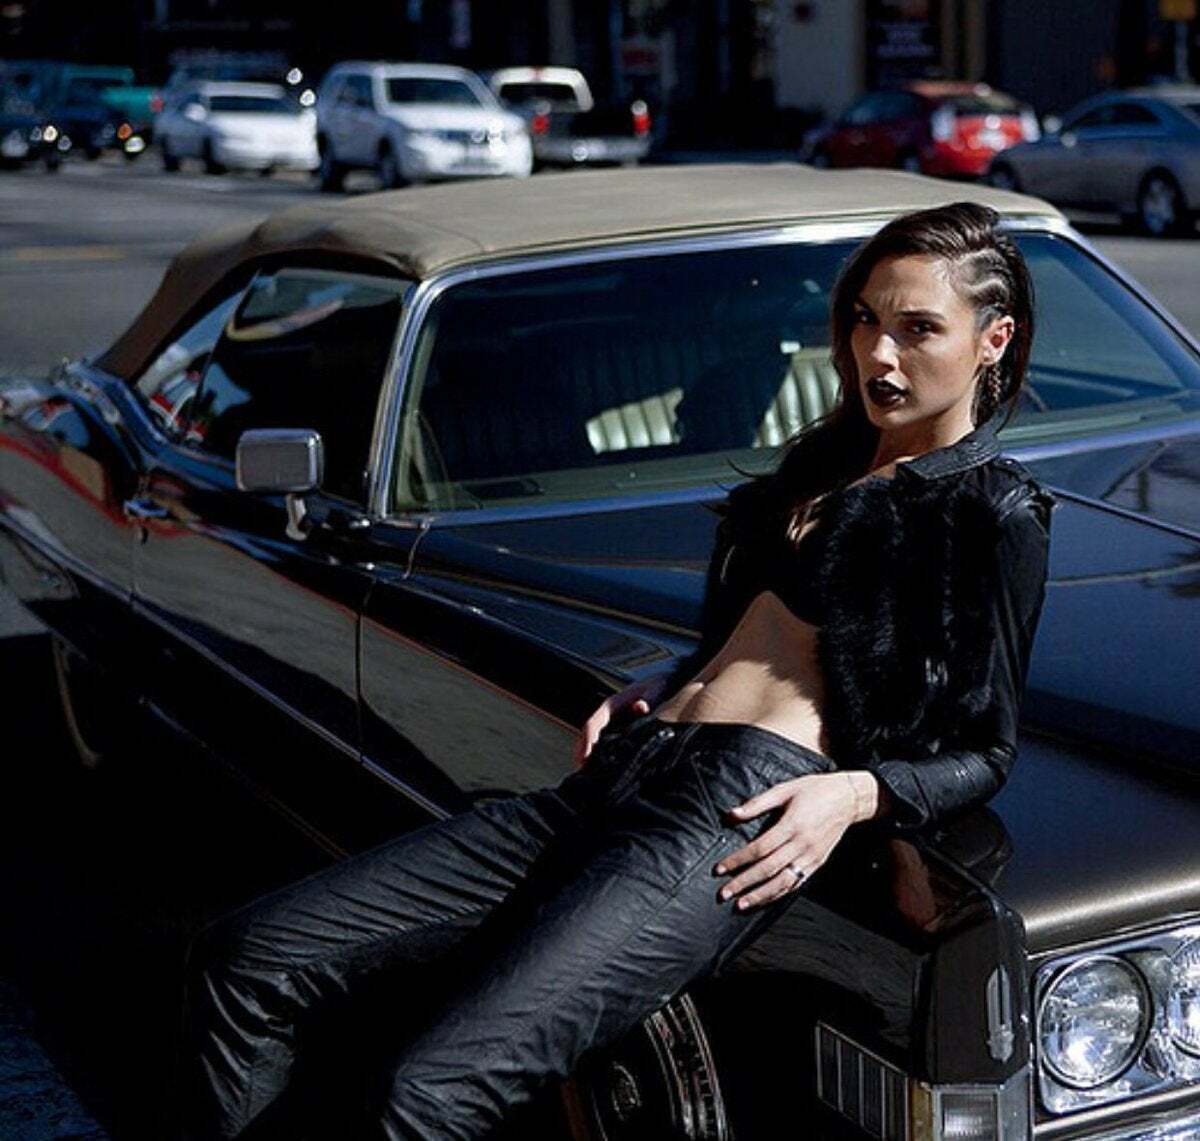 Never knew Gal Gadot could pull off the goth look